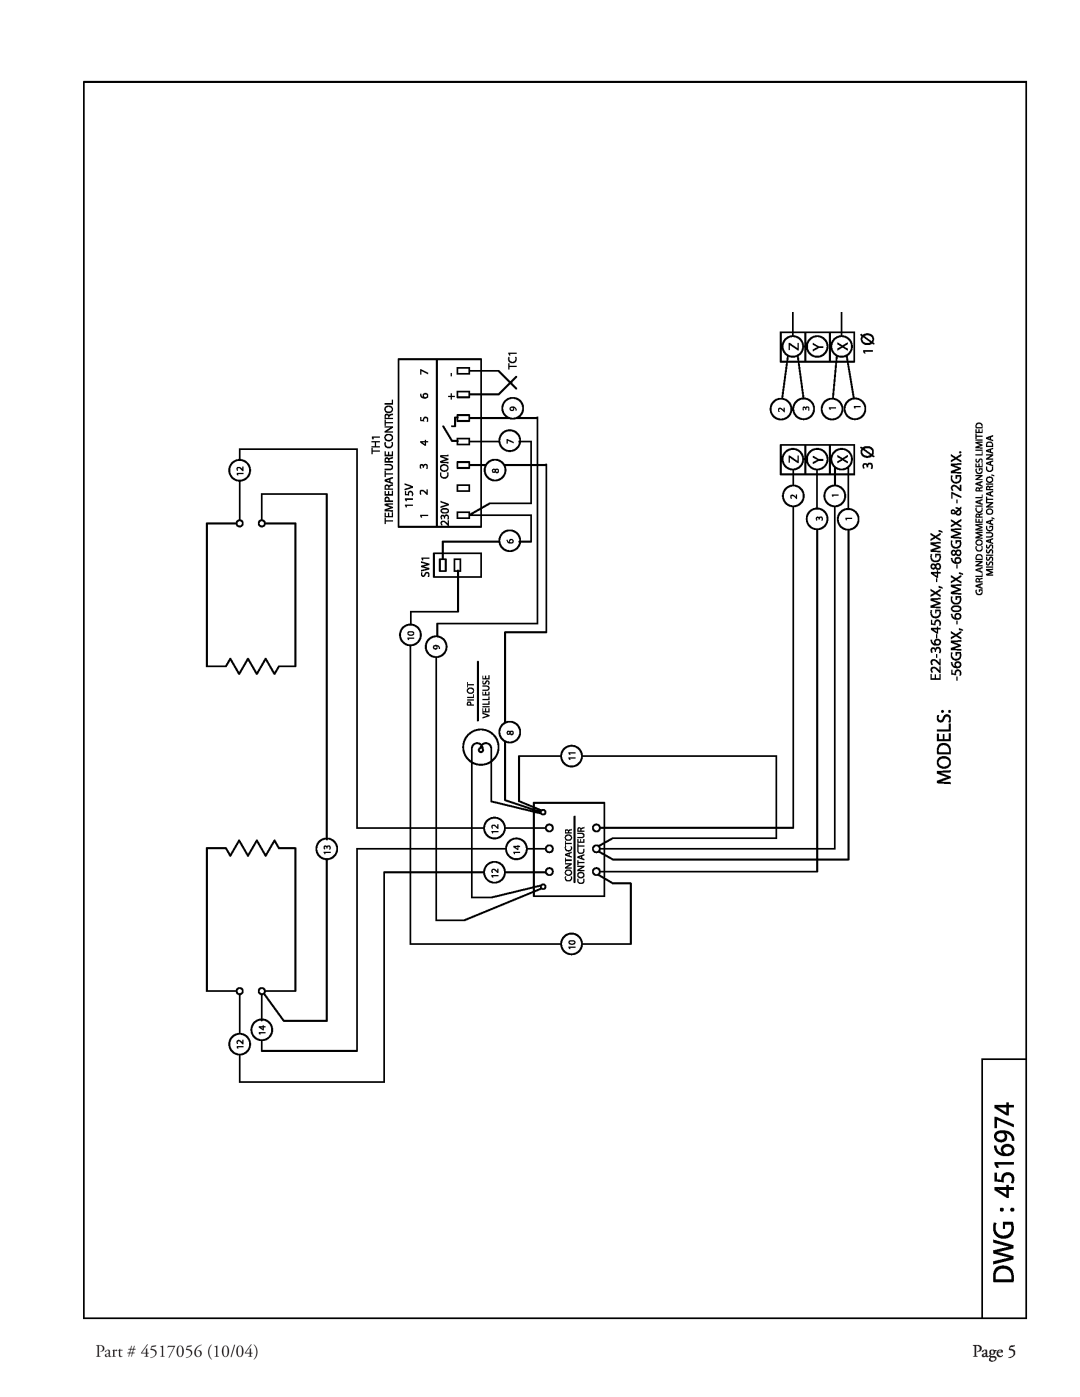 Garland E22-36 installation instructions 4517056 10/04, Page 